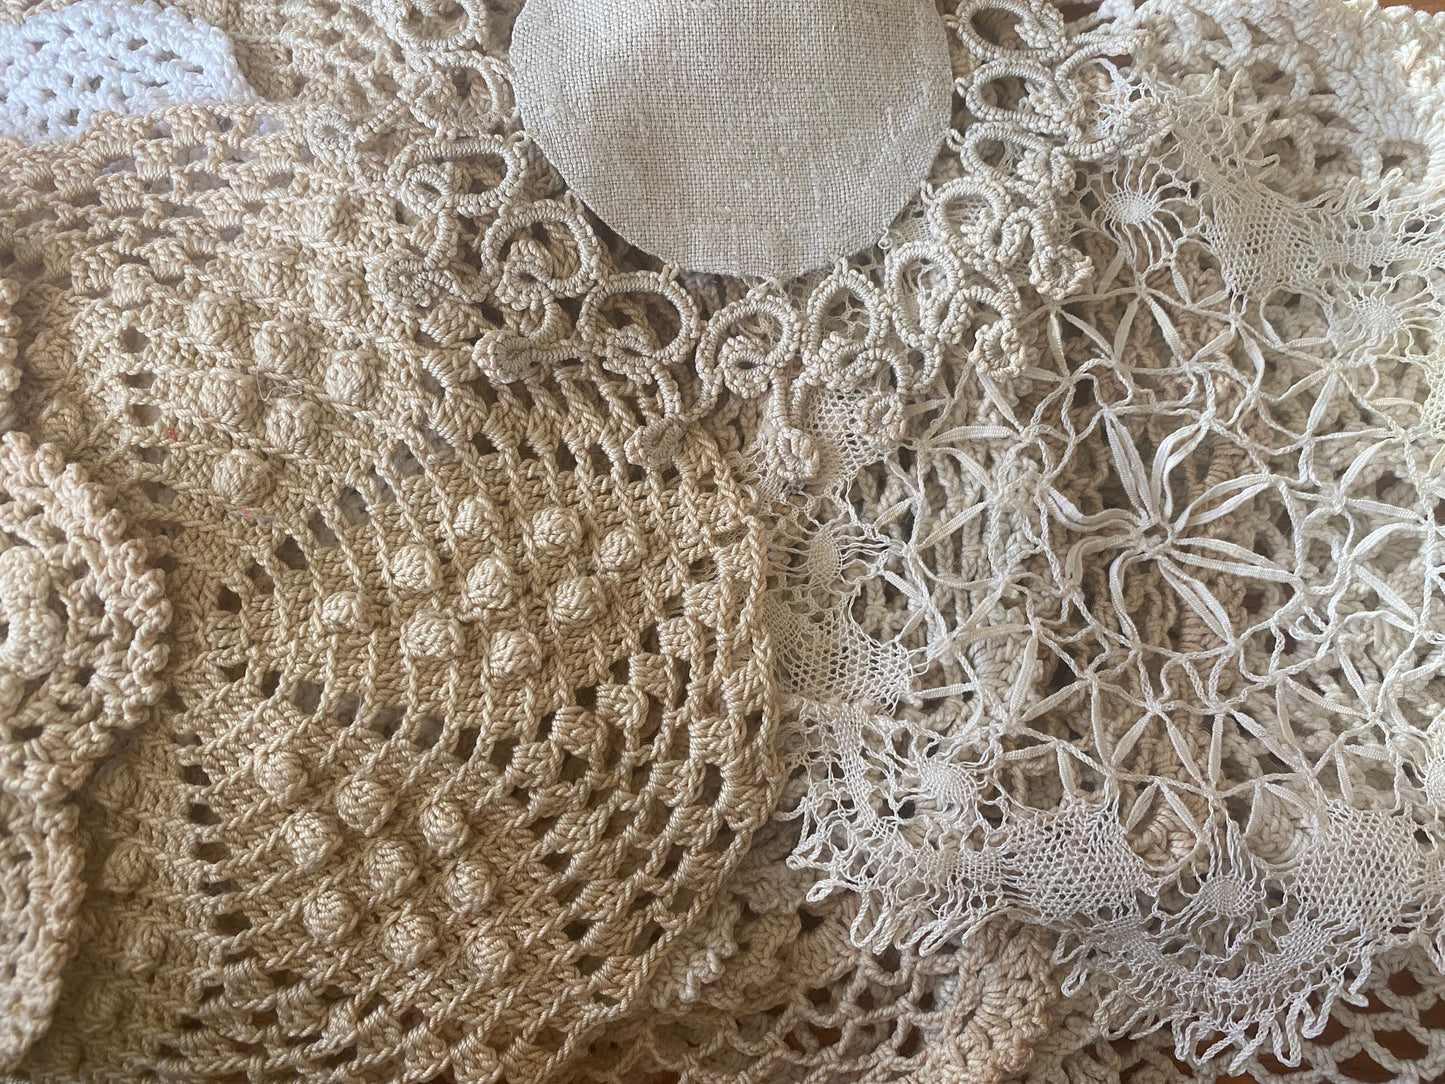 Six vintage and antique cotton doilies, 4-12" diameter, cottage core, creams & whites, for creative uses and visible mending